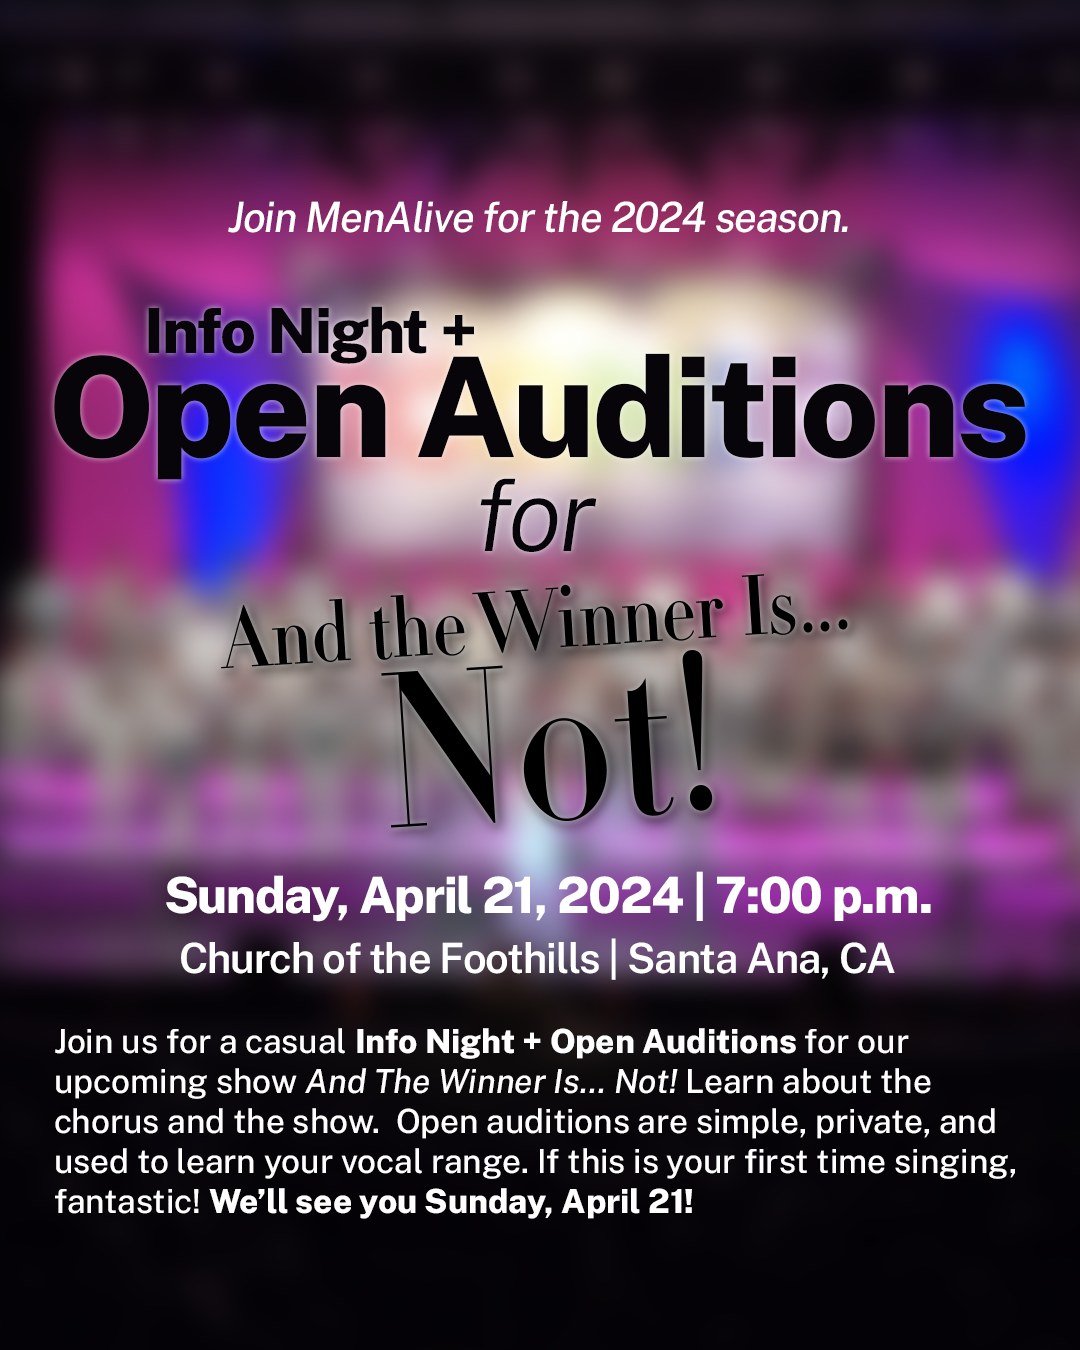 Join us for a casual Info Night + Open Auditions for our upcoming show, And The Winner Is... Not! Learn about the chorus and the show.  Open auditions are simple, private, and used to learn your vocal range. If this is your first time singing, fantas